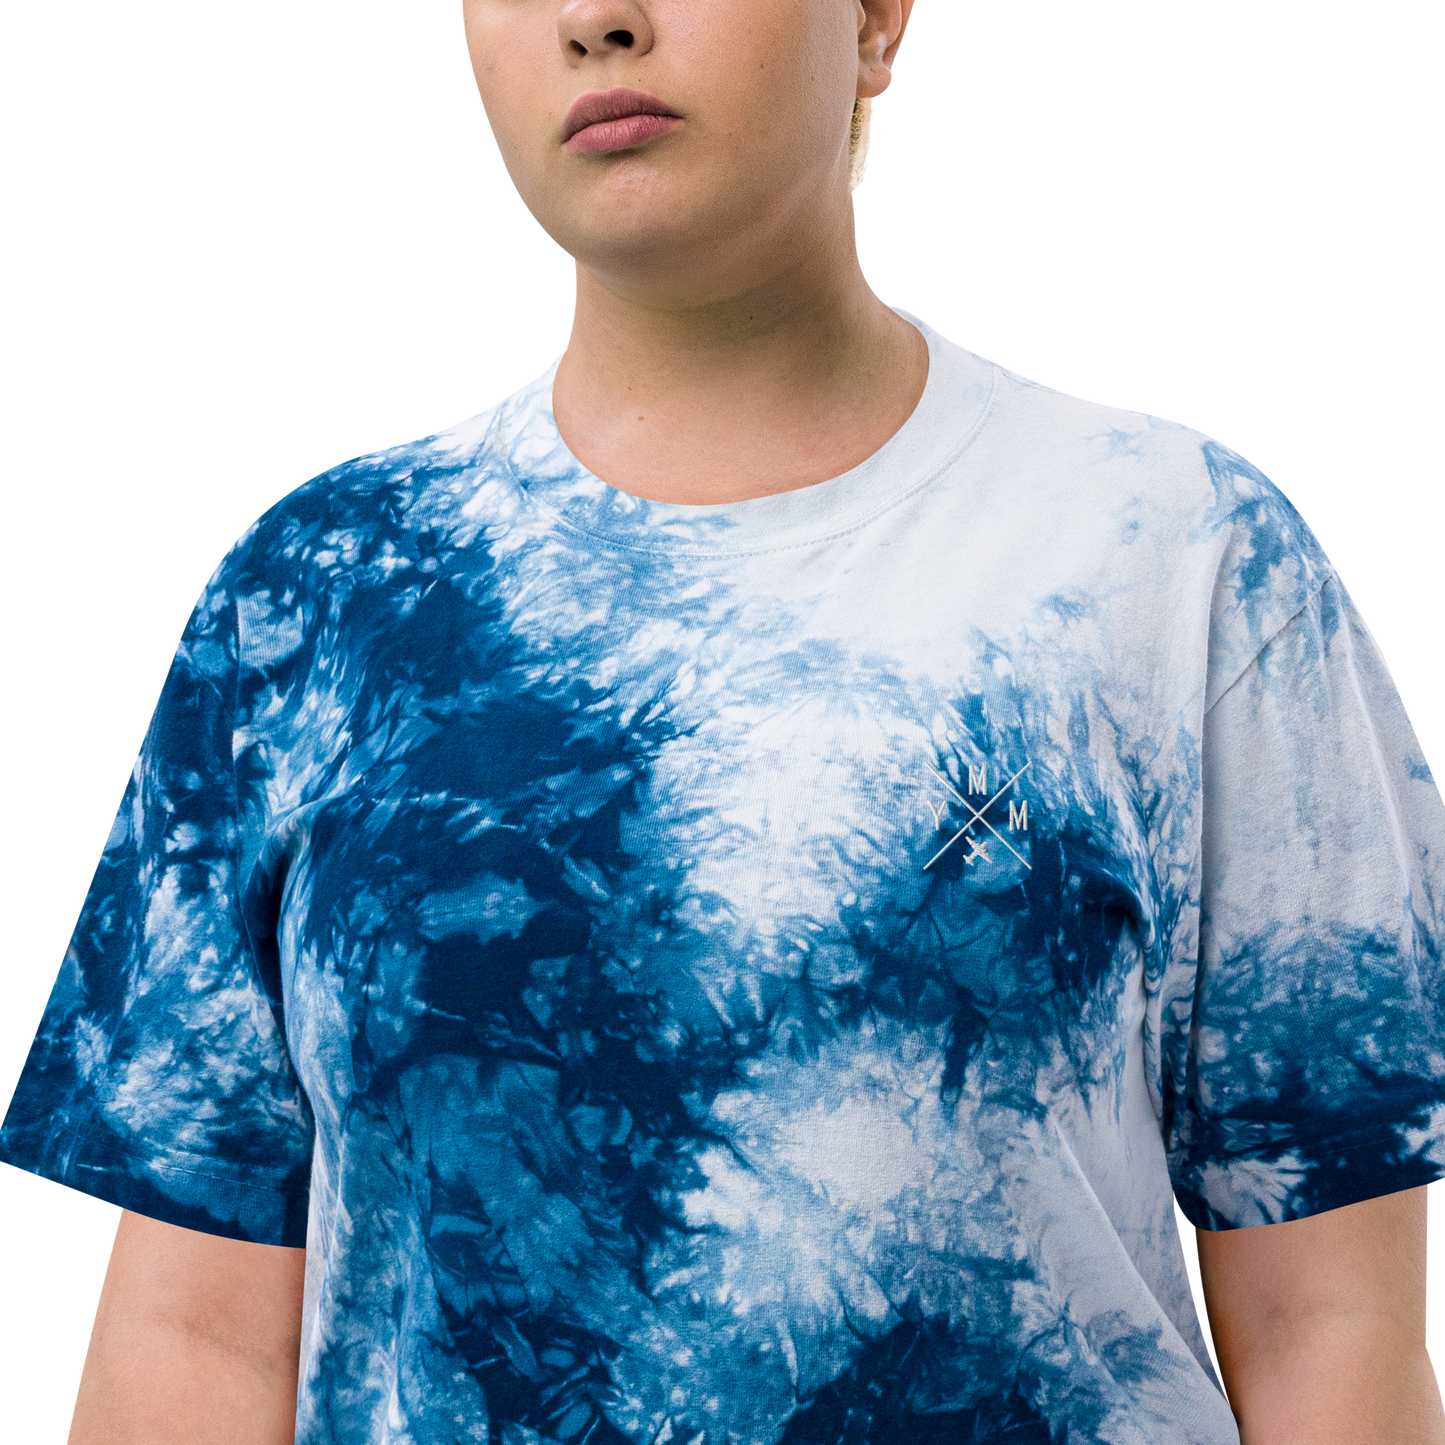 Crossed-X Oversized Tie-Dye T-Shirt • YMM Fort McMurray • YHM Designs - Image 10